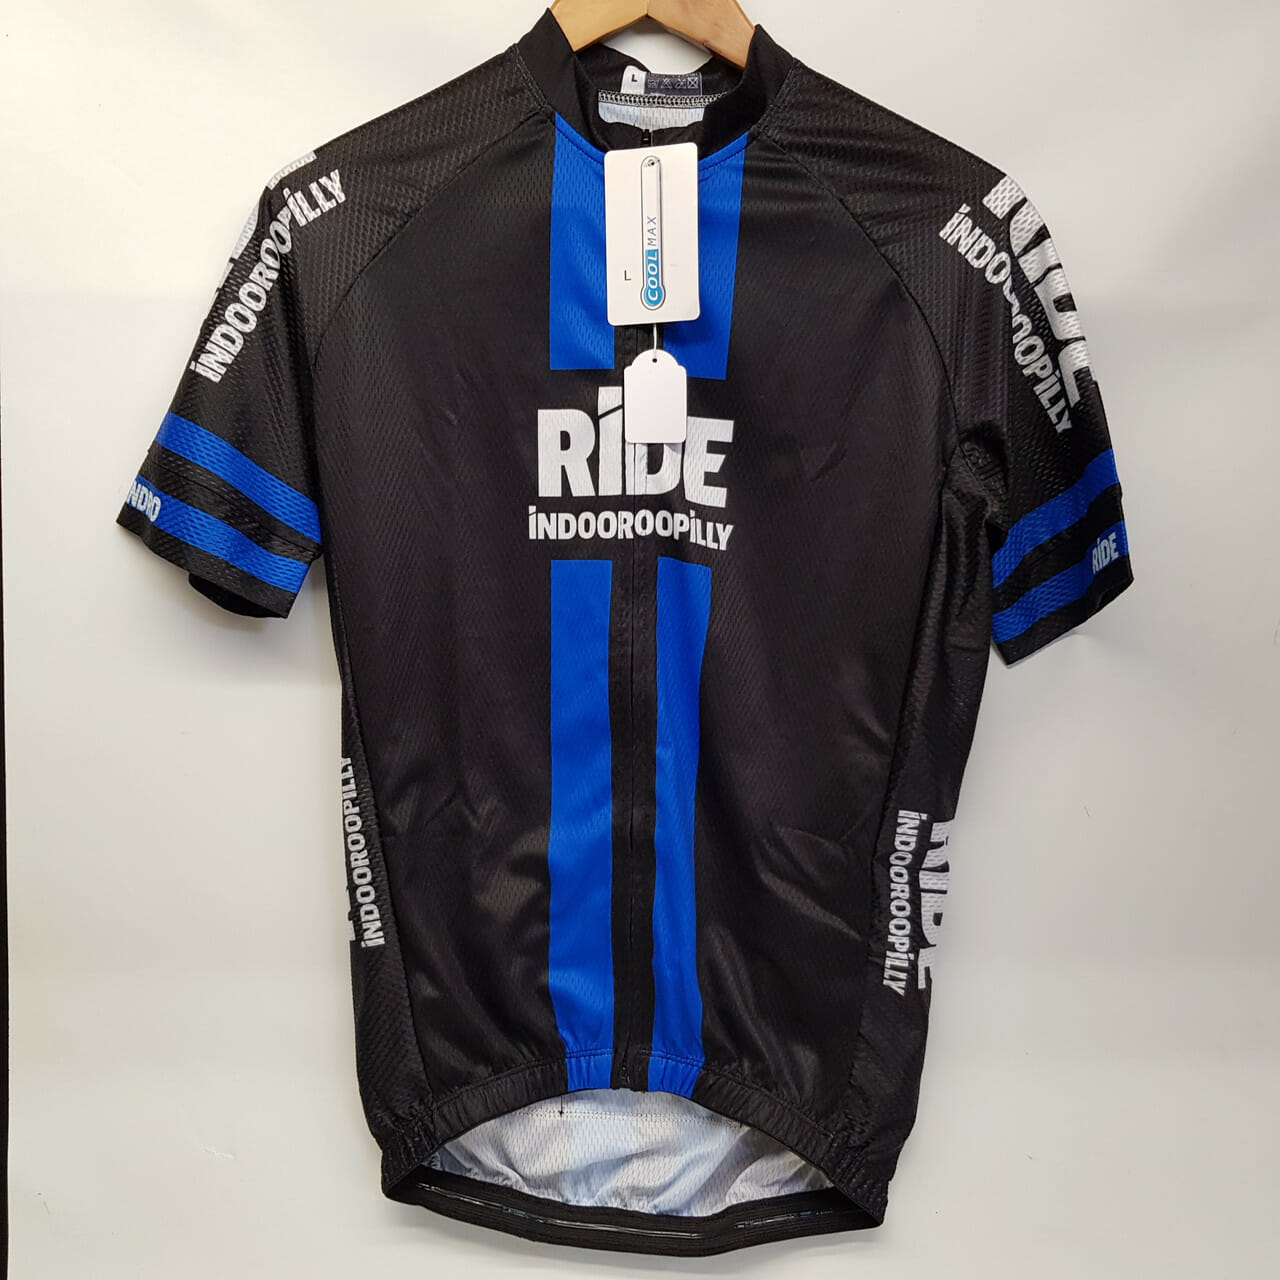 RIDE INDOOROOPILLY JERSEY BLUE SIZE L #48883-1